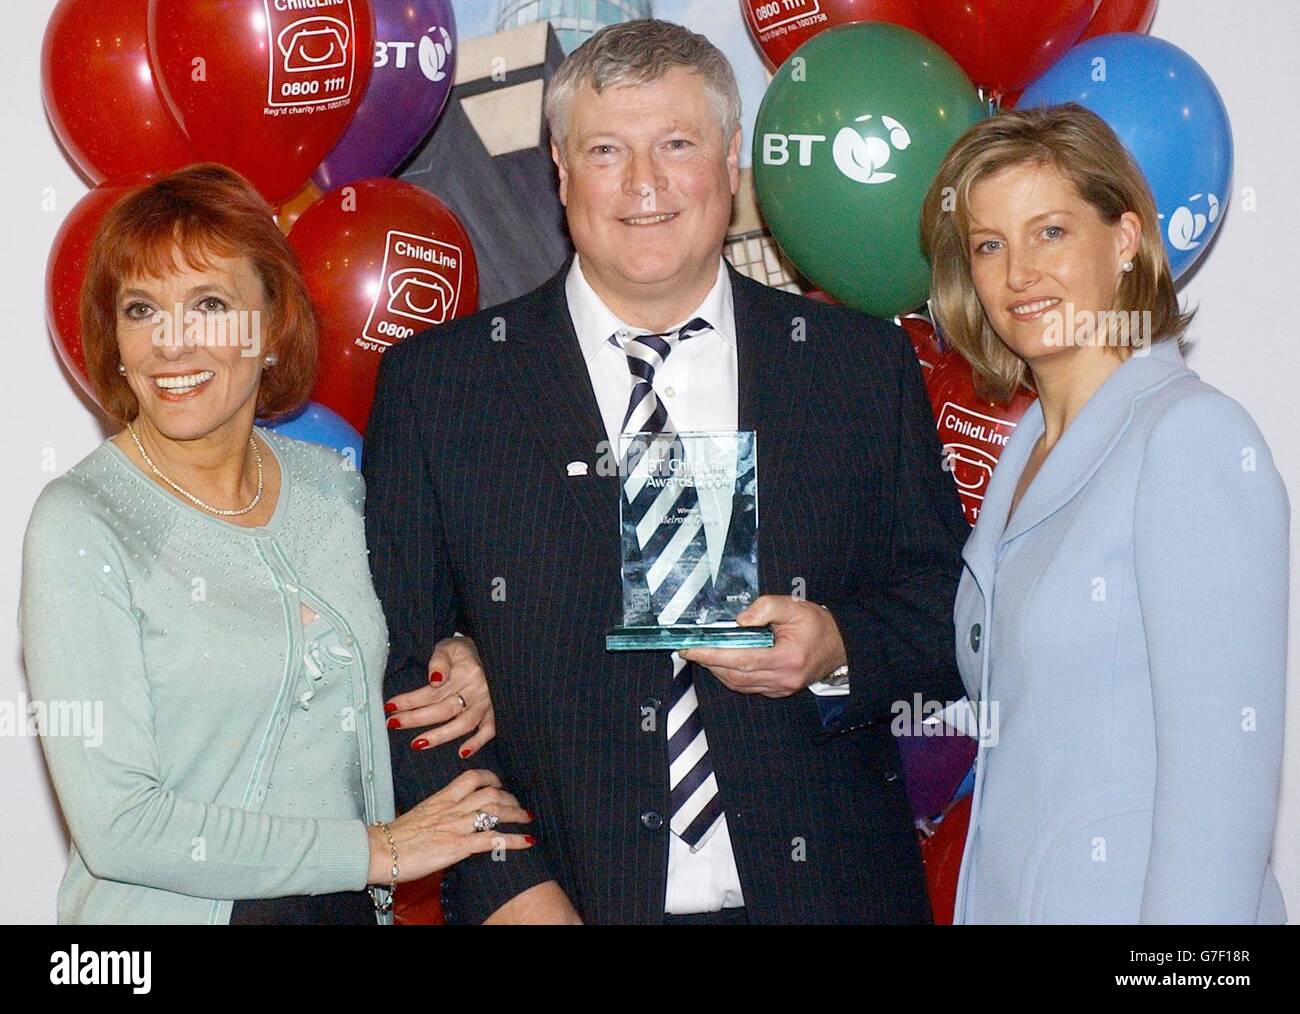 A man who dedicated his time to helping a gang of youths he found trying to break into his car was honoured for his work. Melrose Diack from Clitheroe in Lancashire receives an award from Esther Rantzen and The Countess of Wessex at the annual Childline Awards in London where he was honoured for his services to children. Stock Photo